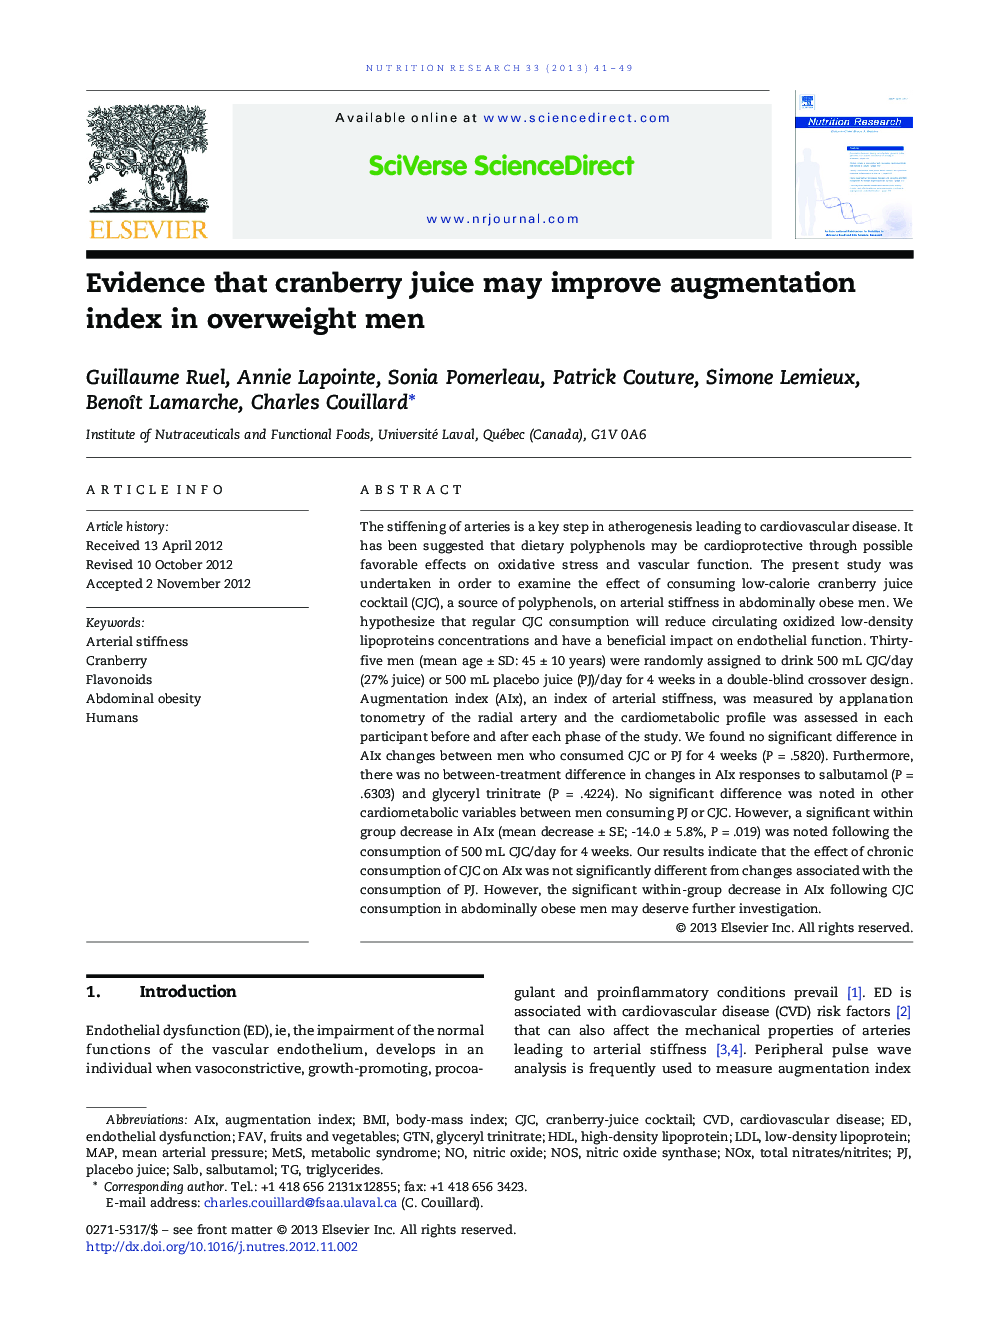 Evidence that cranberry juice may improve augmentation index in overweight men